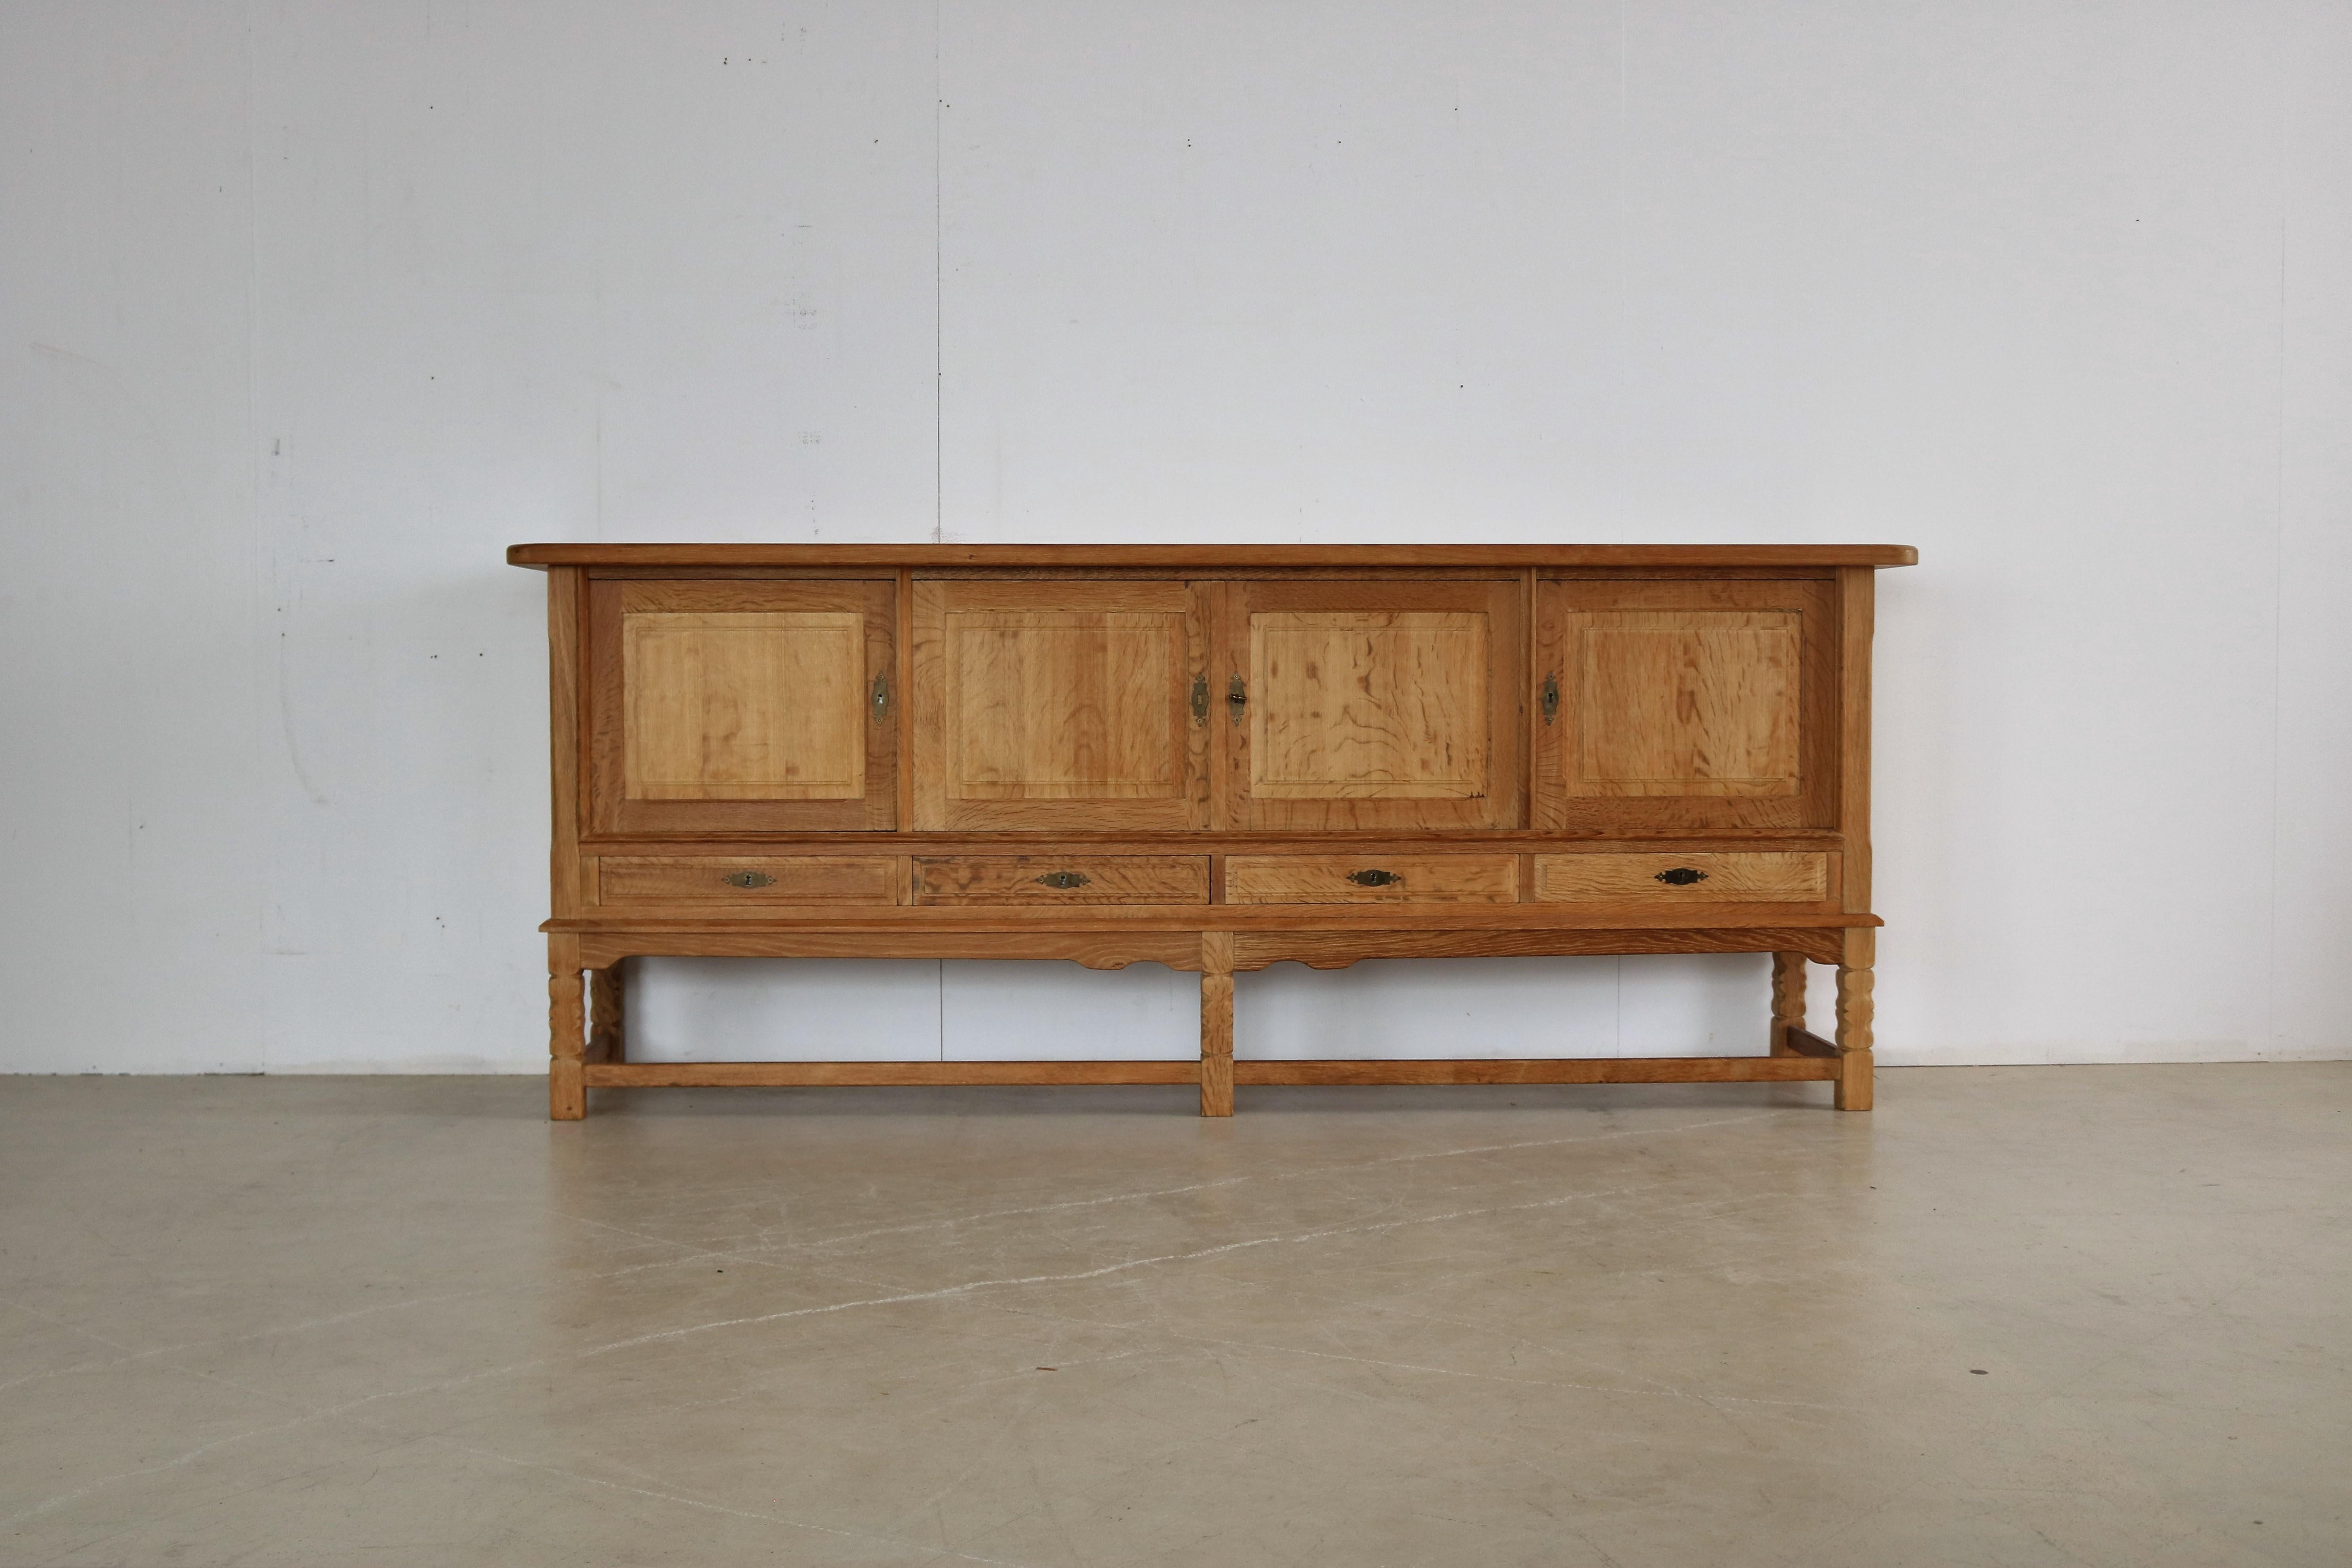 vintage sideboard dresser 1950s brutalist

Impressive solid oak sideboard from the 1950s. Design attributed to Henning Kjaernulf.

period 1950s
designs Stilmobler Denmark
conditions good light signs of use
size 92 x 225 x 50